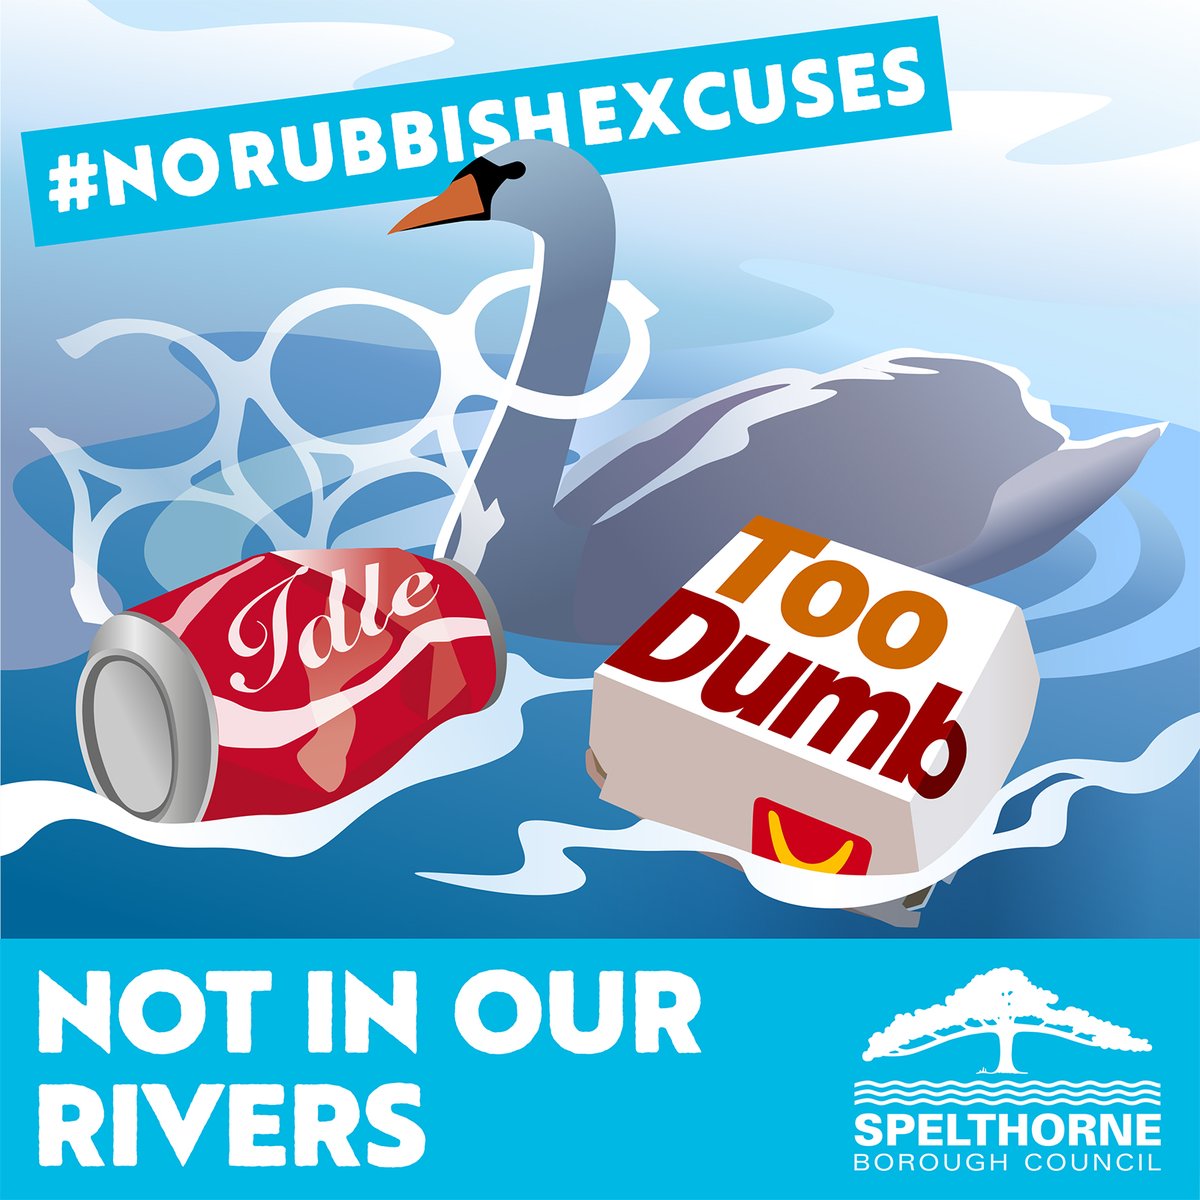 Don't drop litter 🚮 
In our river 🌊 
Make it happy 😃 
Being litter free 💚 

(To the tune of Ain't Nobody)

By keeping our riverbanks and river litter free, we can make the wonderful Thames welcoming to everyone. #NoRubbishExcuses